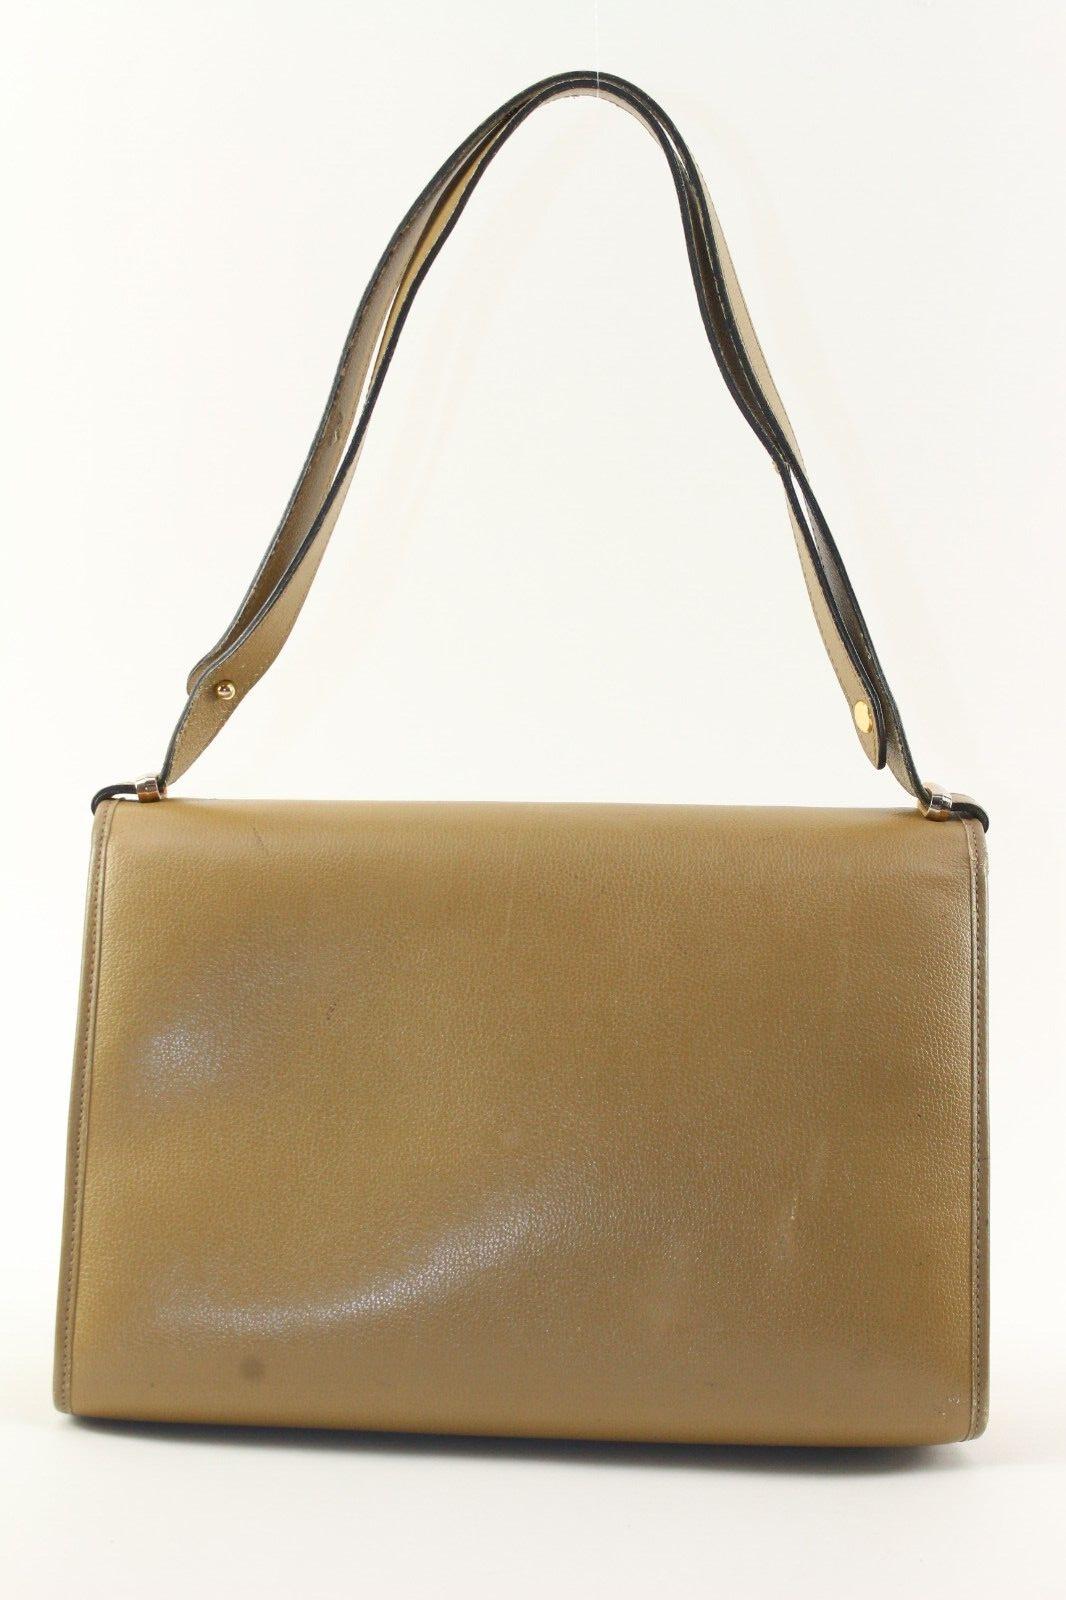 DIOR Neutral Flap Bag 6DD1226K In Good Condition For Sale In Dix hills, NY